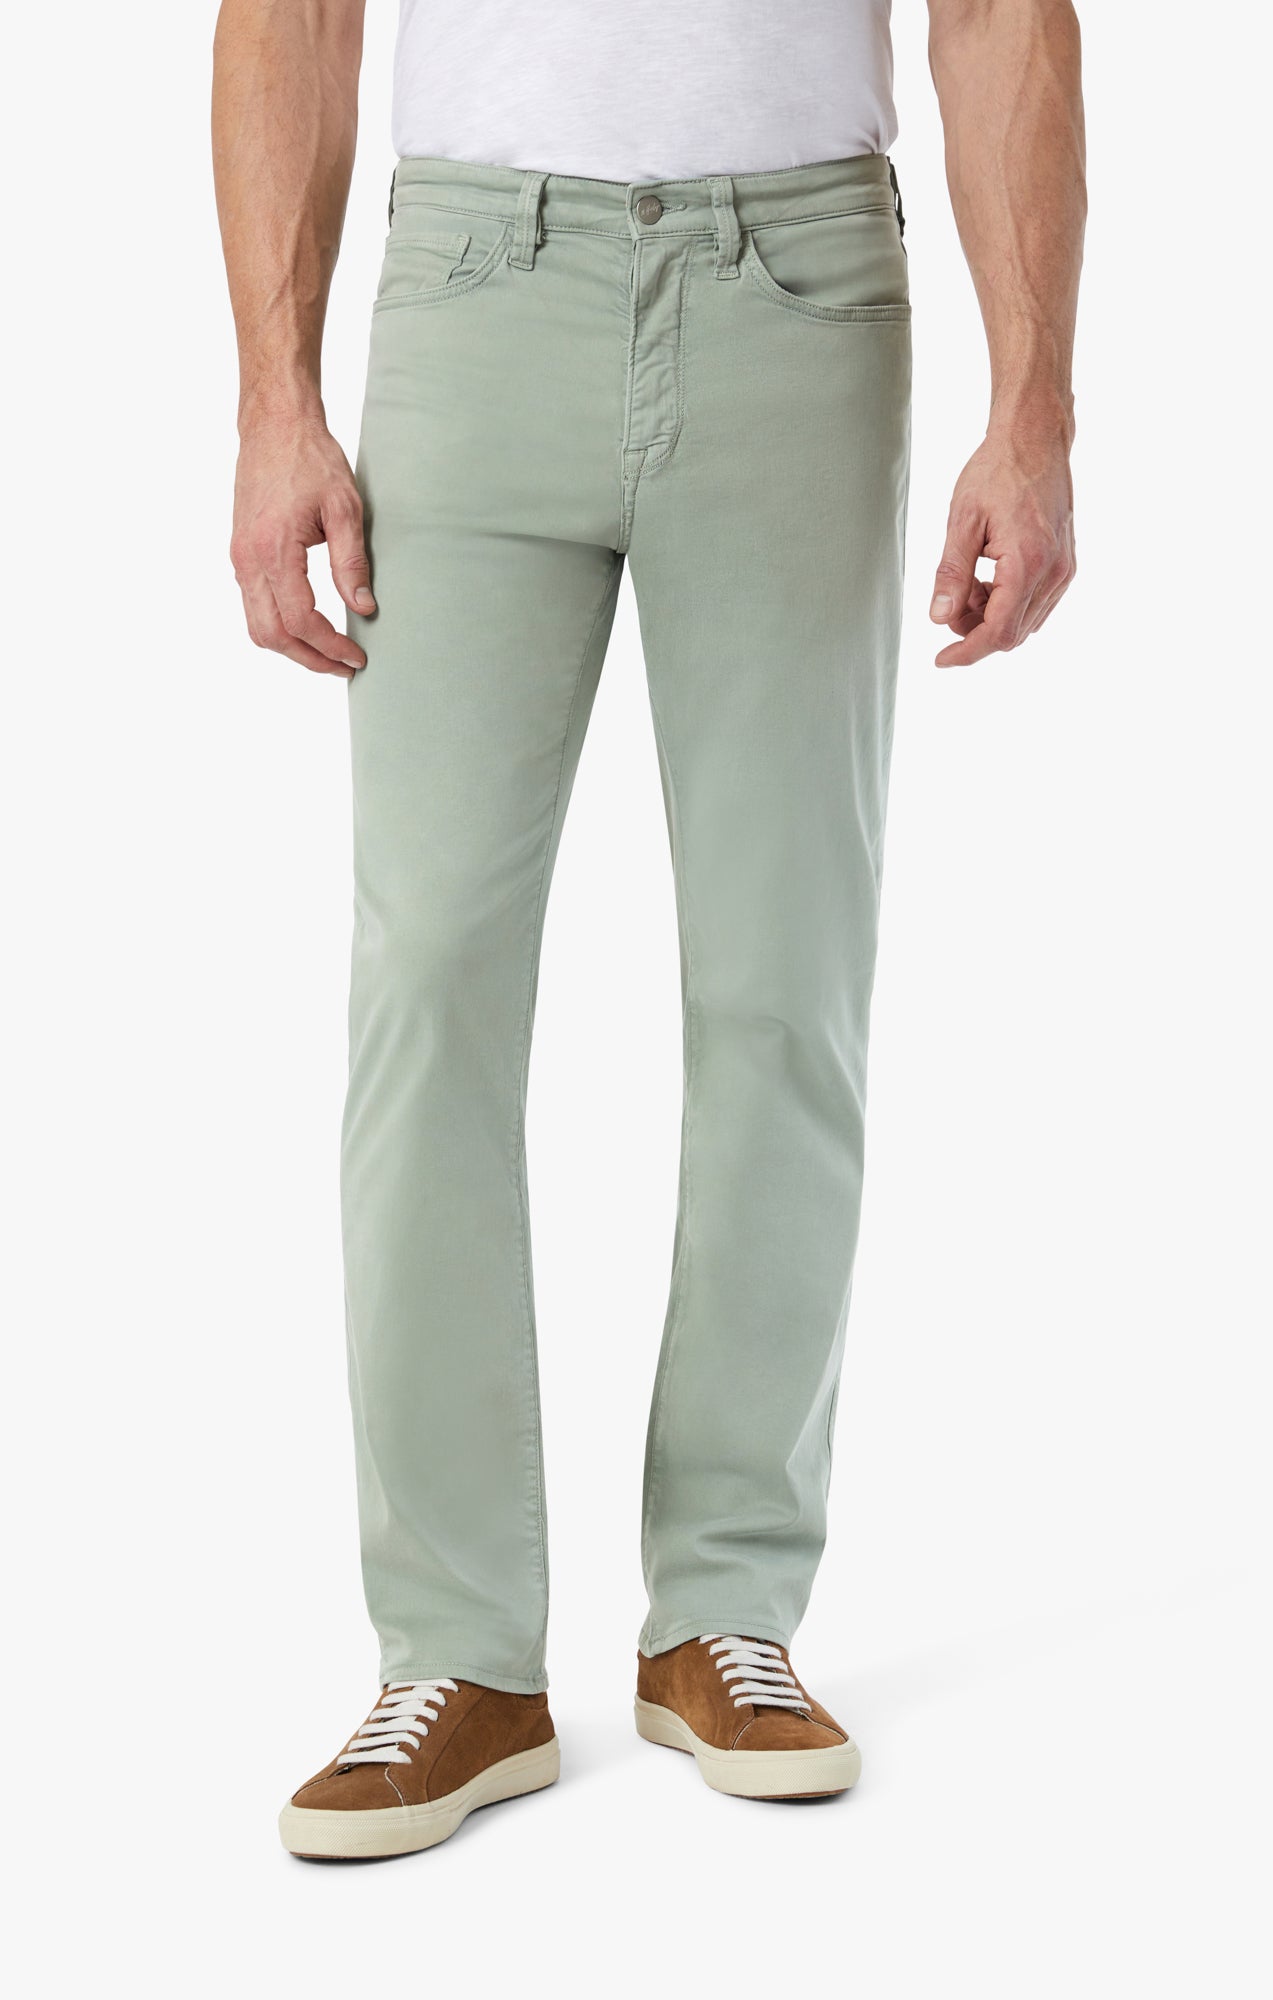 Charisma Relaxed Straight Leg Pants In Iceberg Green Twill